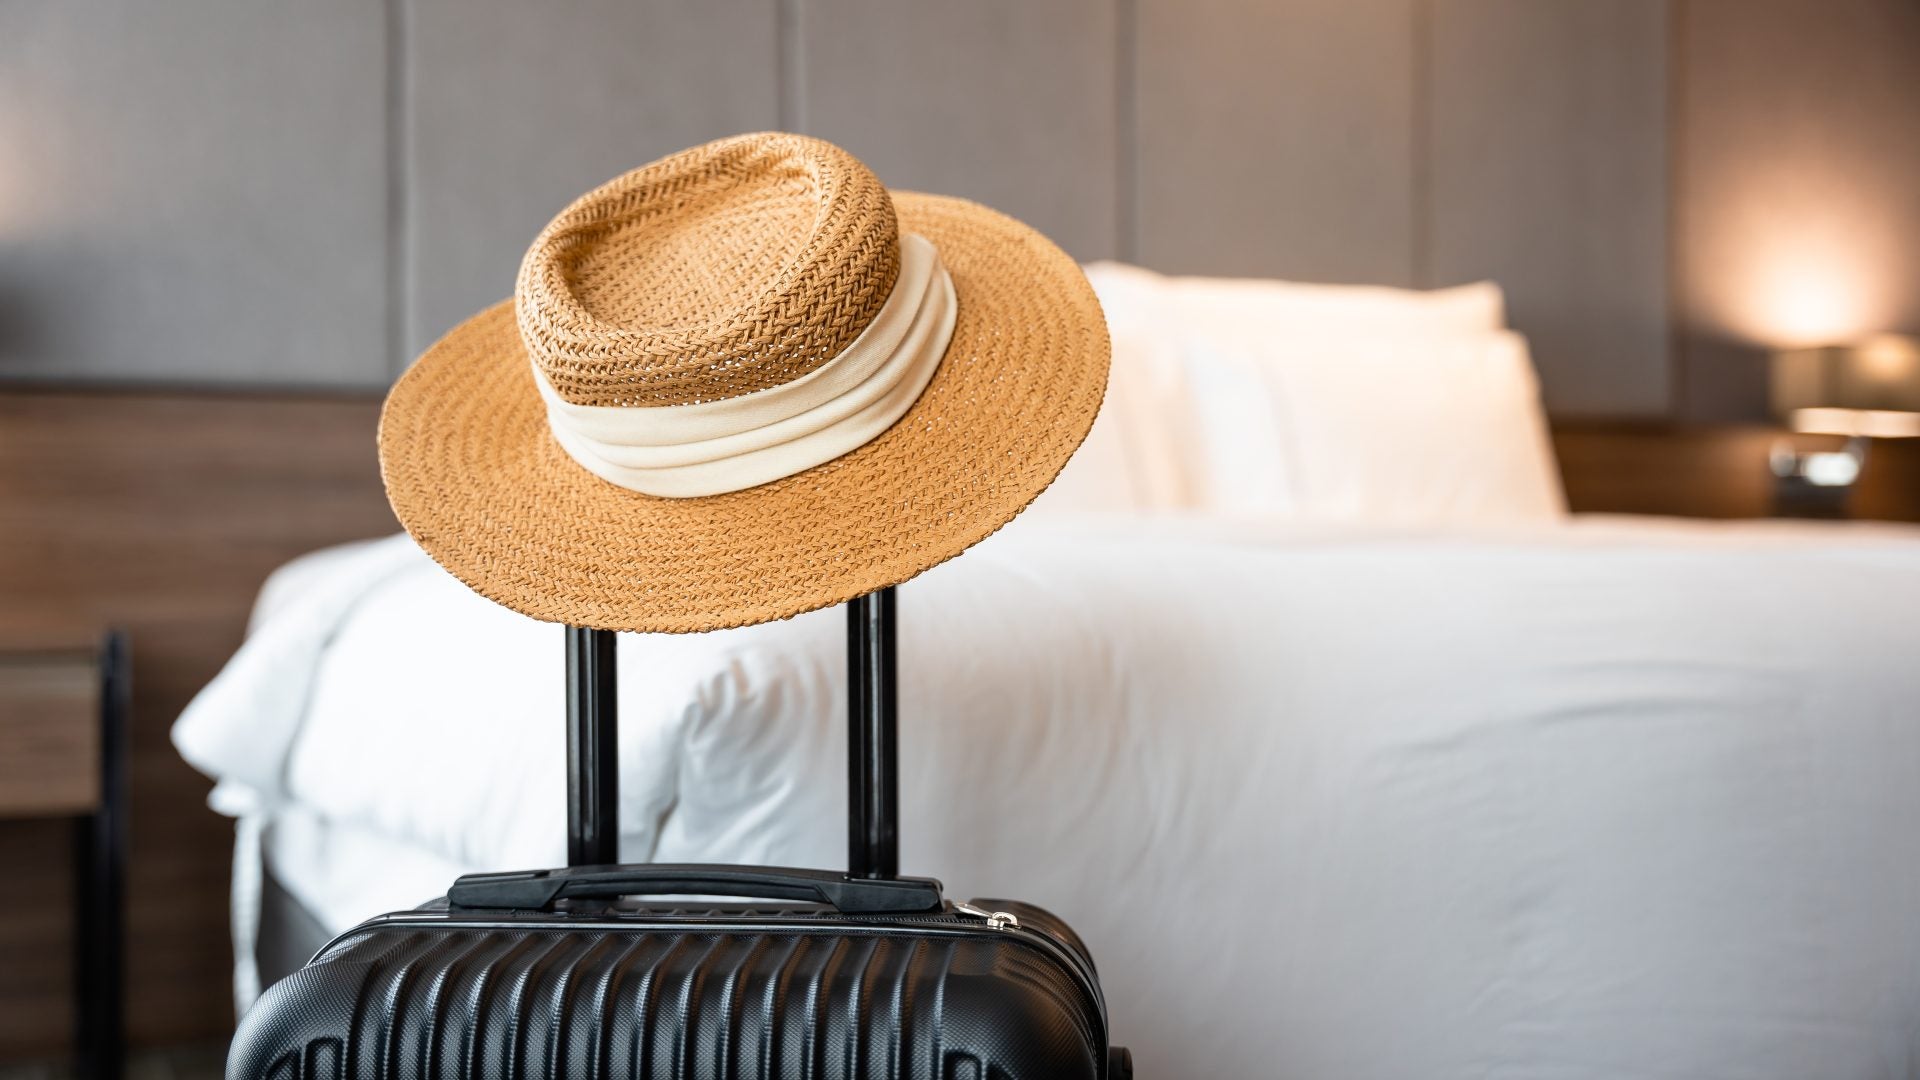 The 9 Best Gifts Ideas For Travelers